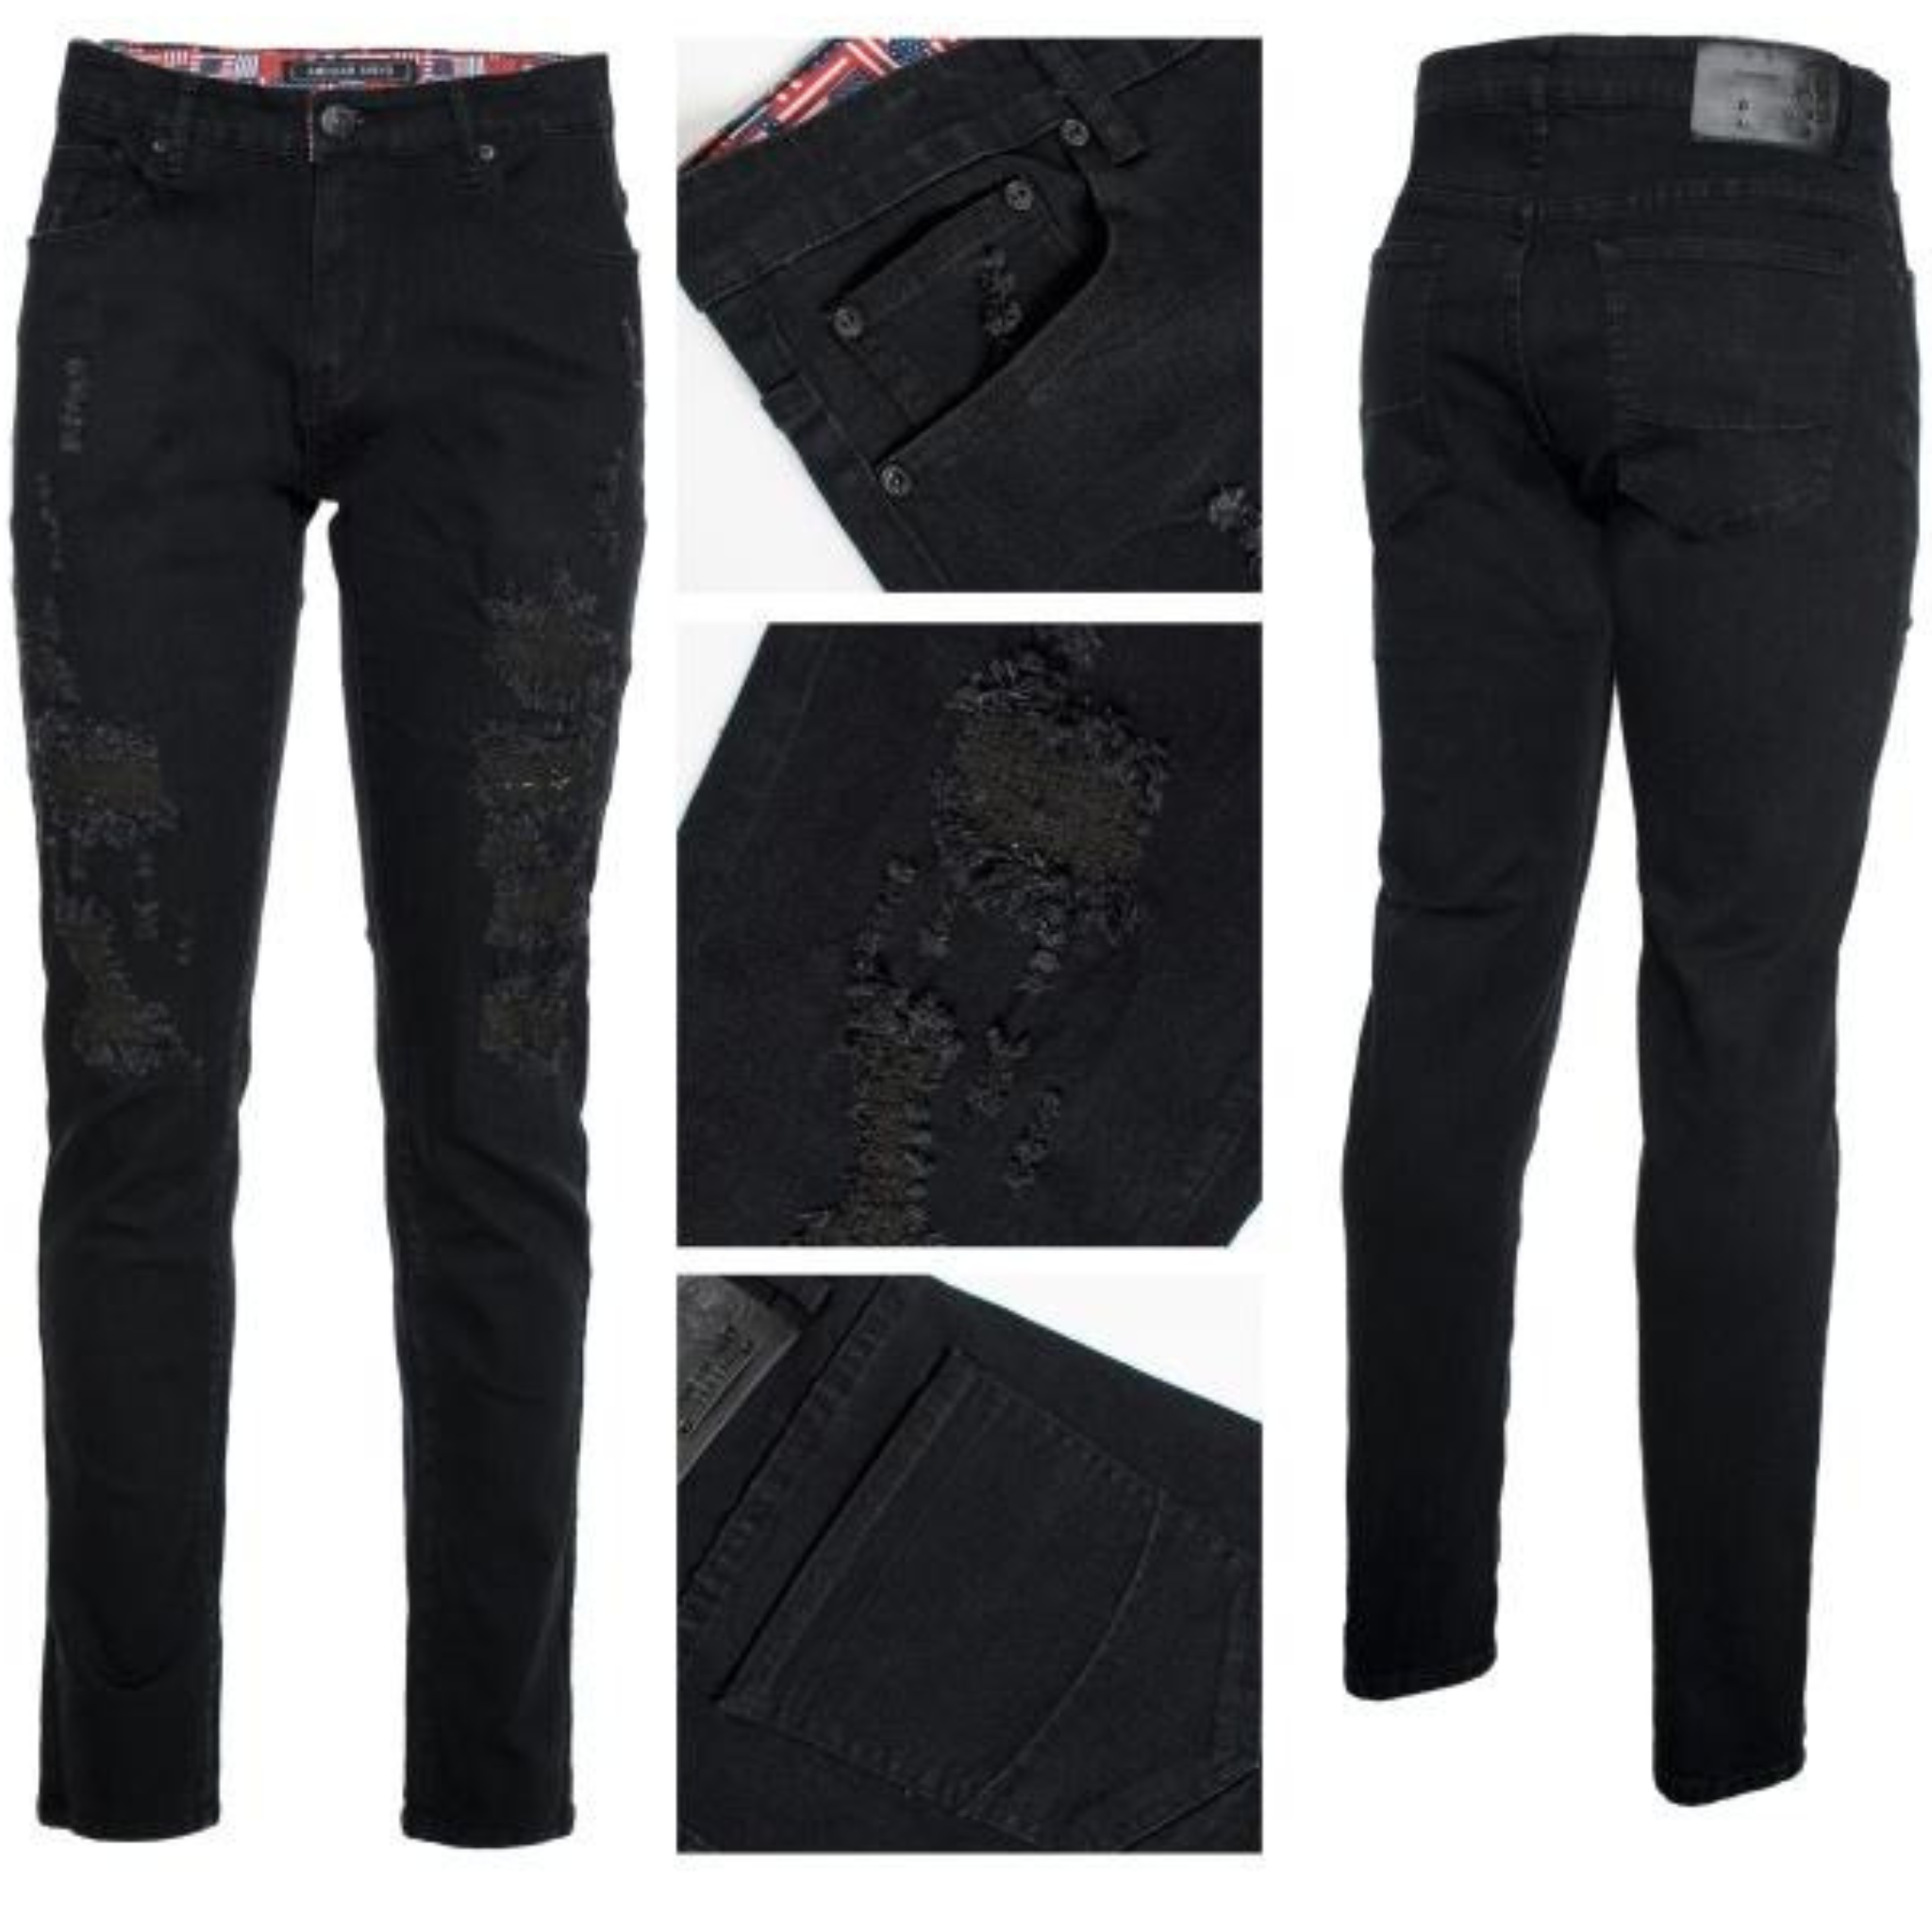 Buy DSDZ Men's Stretch Ripped Distressed Denim Jeans with Side Zippers (34,  Black0) at Amazon.in